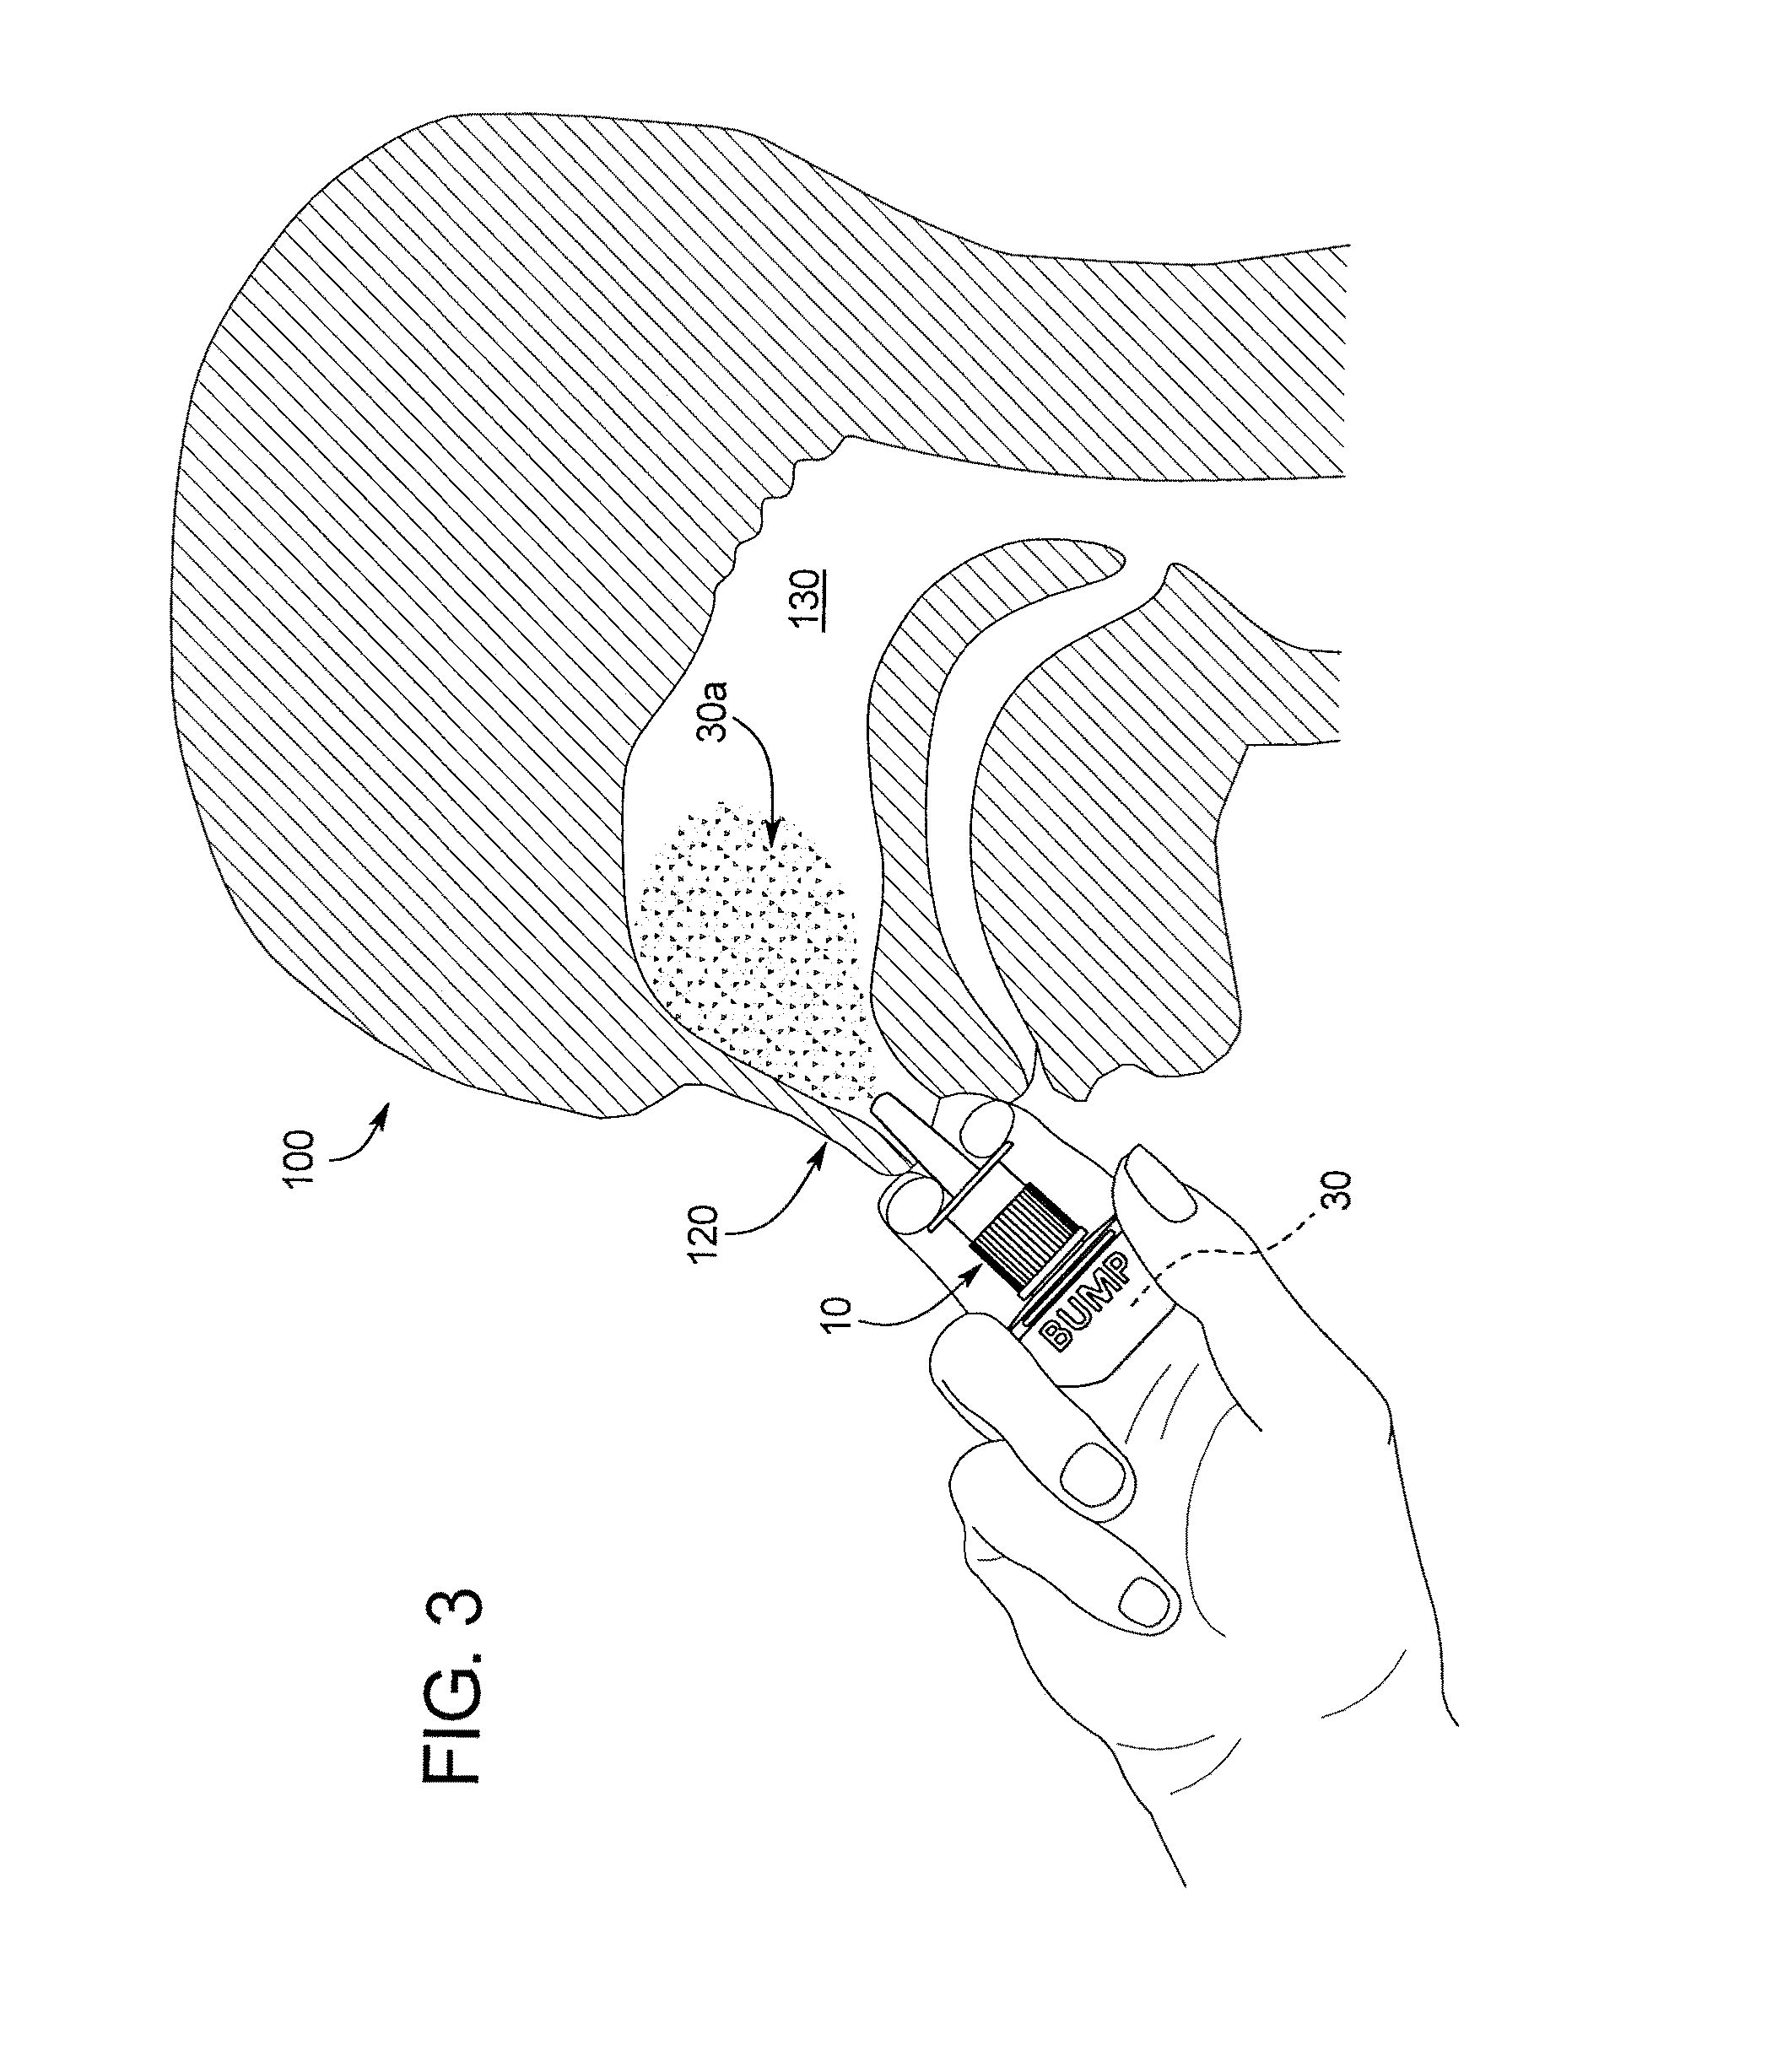 Sprayable oxygenated saline composition and method for treating nasal congestion, allergy, dryness, eye irritation, throat irritation, wounds, and skin as applied to human tissues